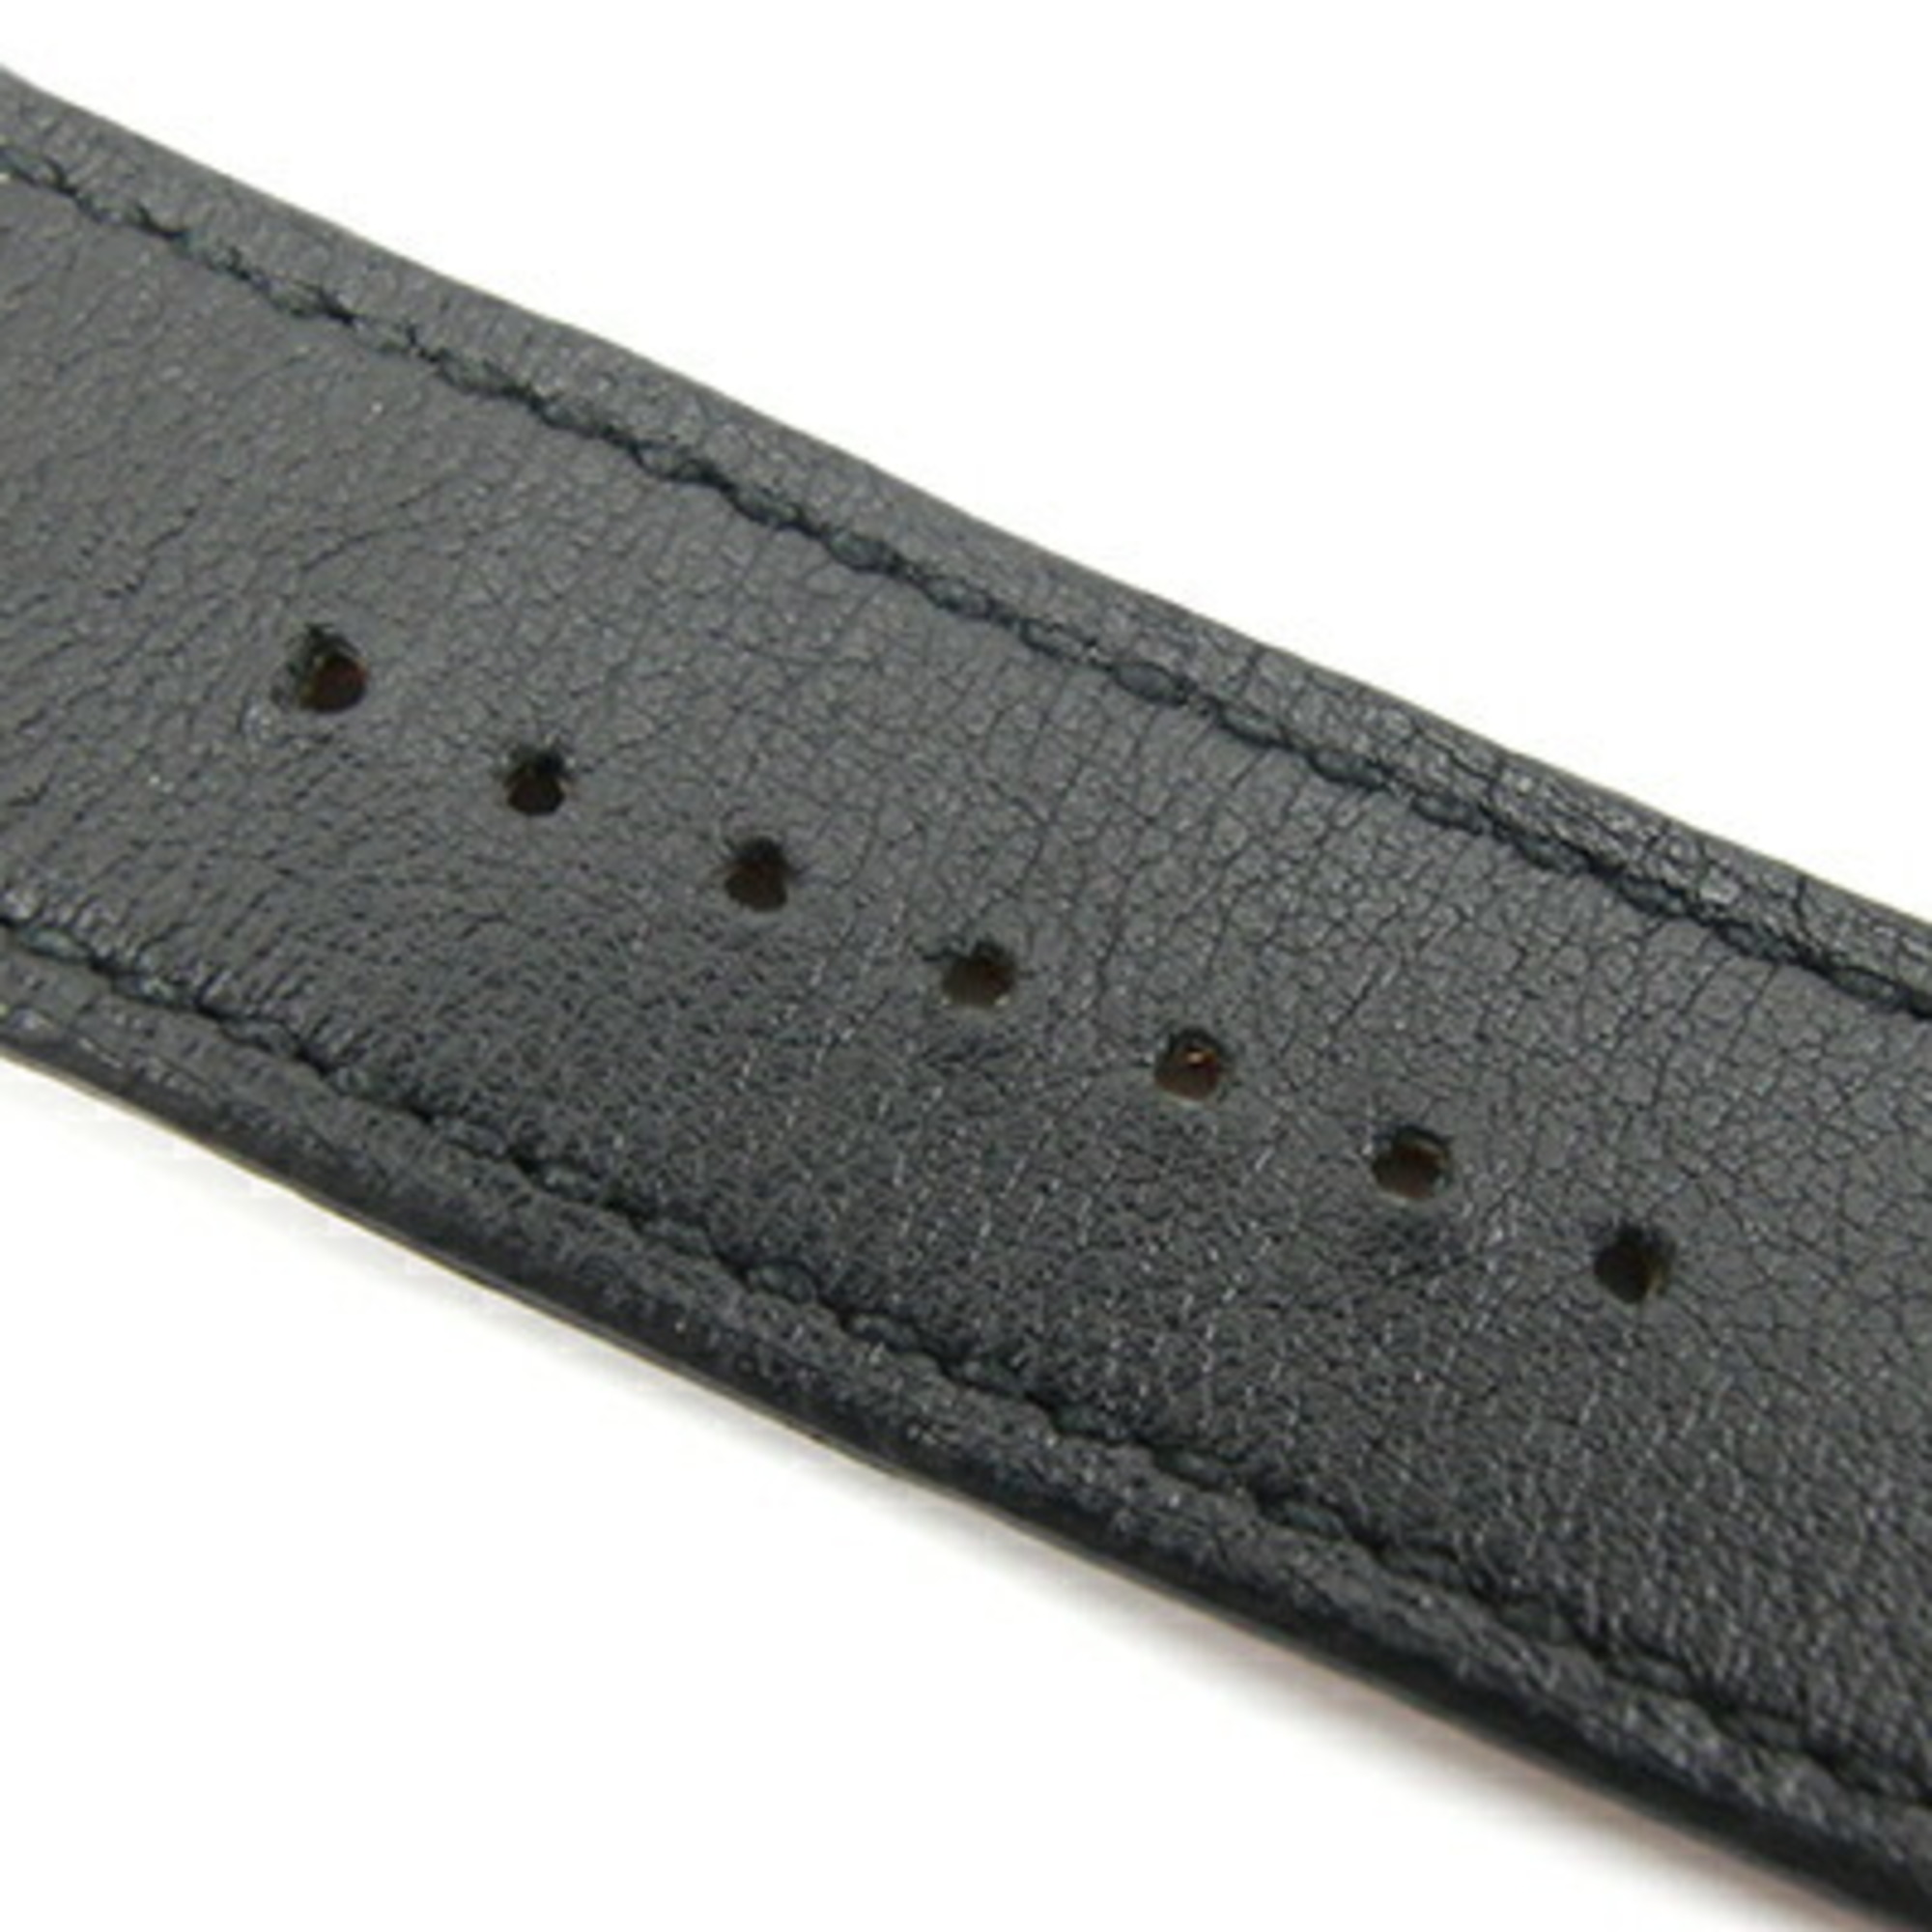 Hermes Replacement Belt 45mm Tour Leather Strap Space Black Vaux Swift Free Size D Engraved Men's Apple Watch HERMES